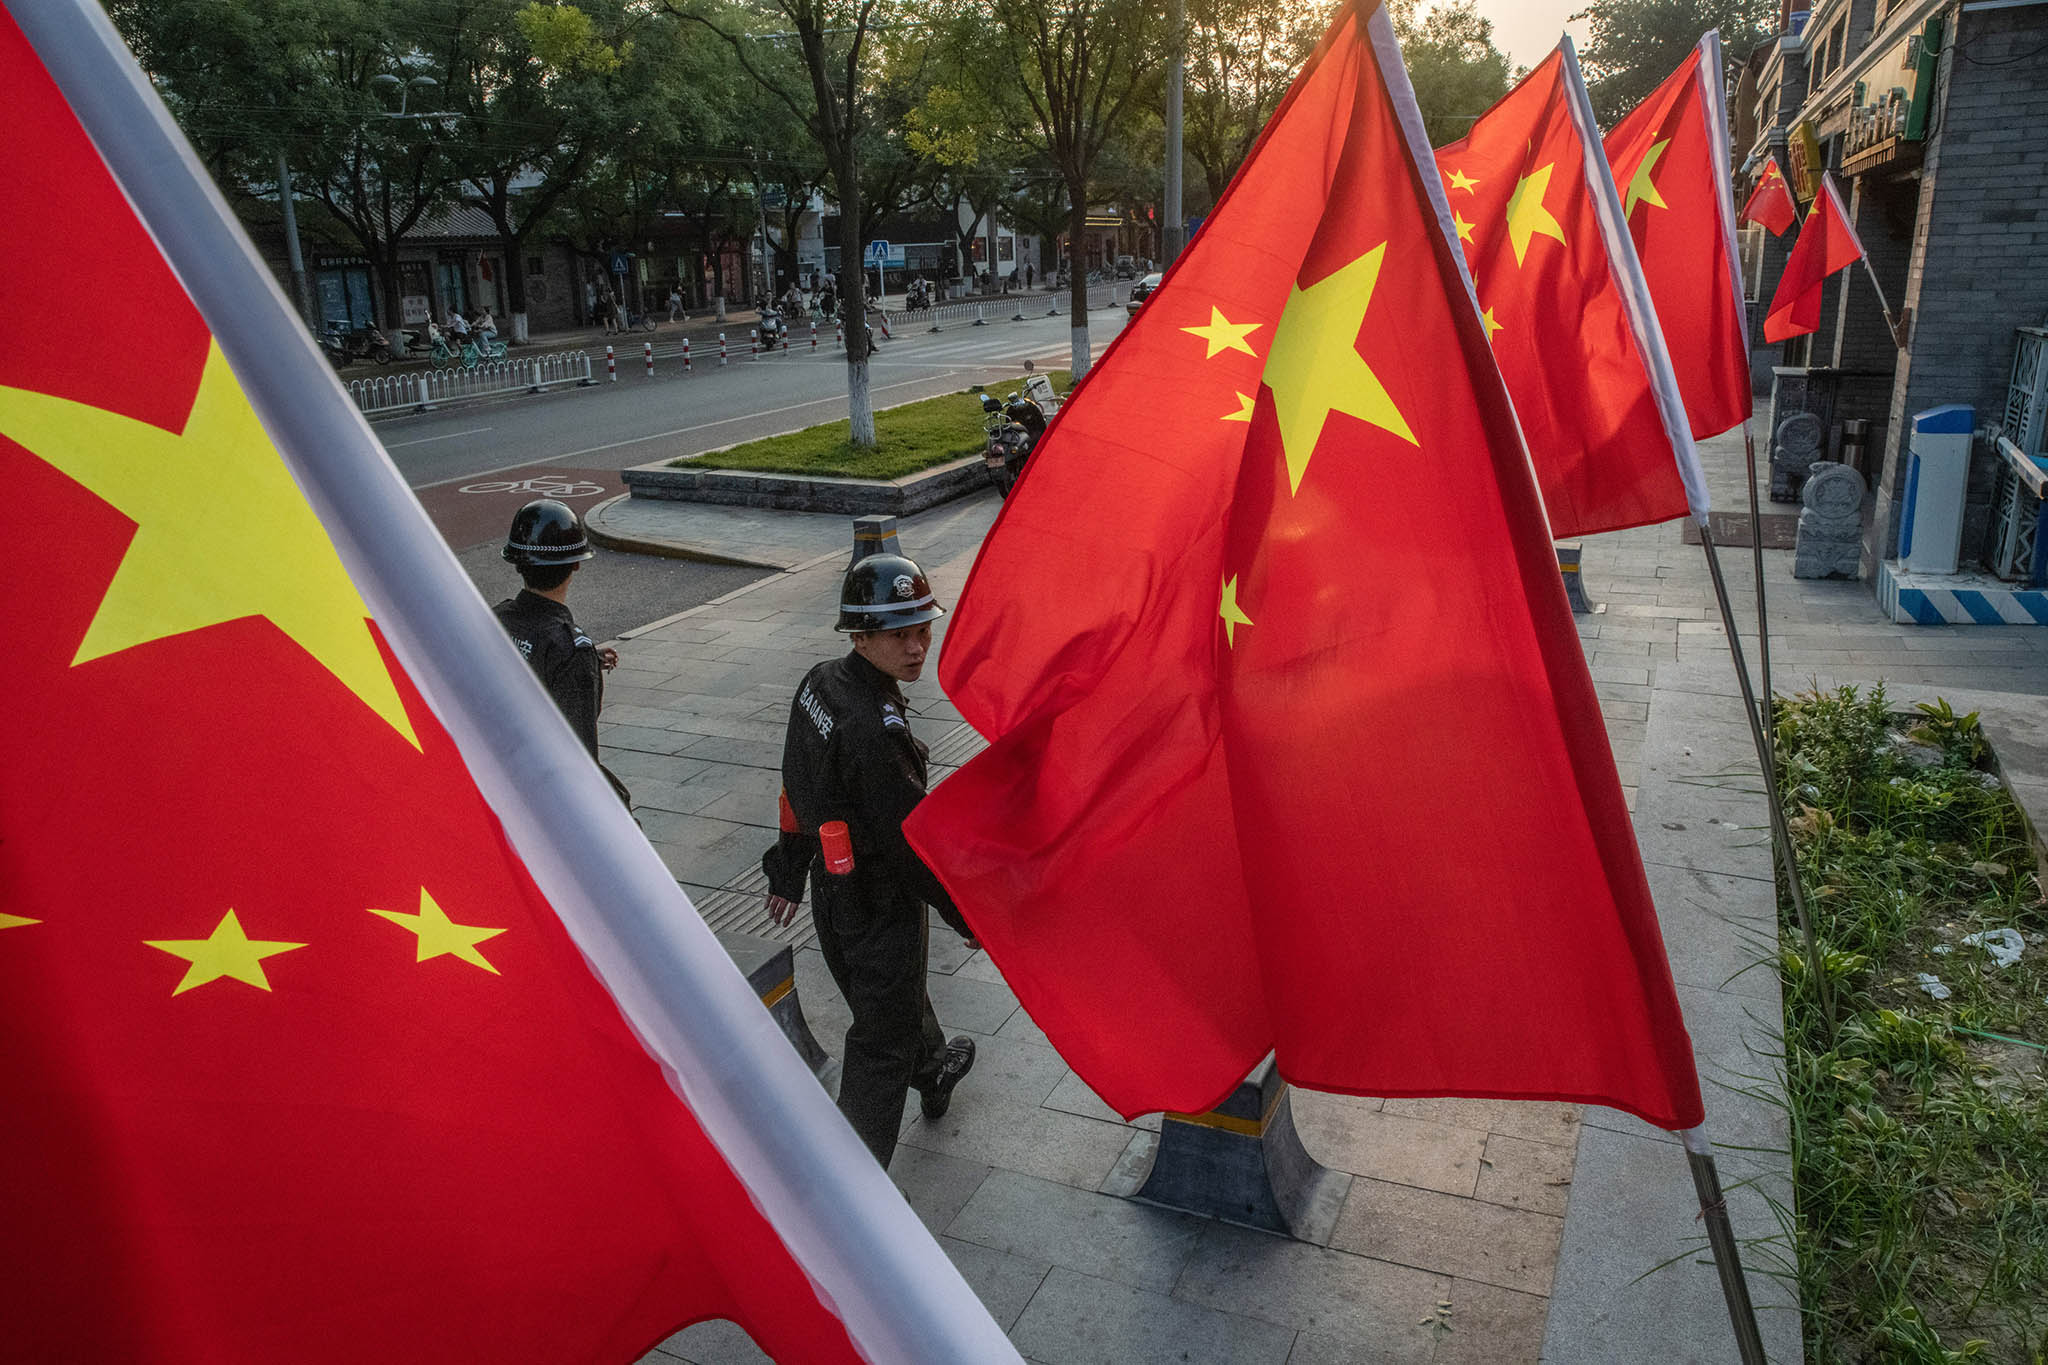 Security guards walking past Chinese flags decorating a street in Beijing. October 1, 2019. (Gilles Sabrie/The New York Times)